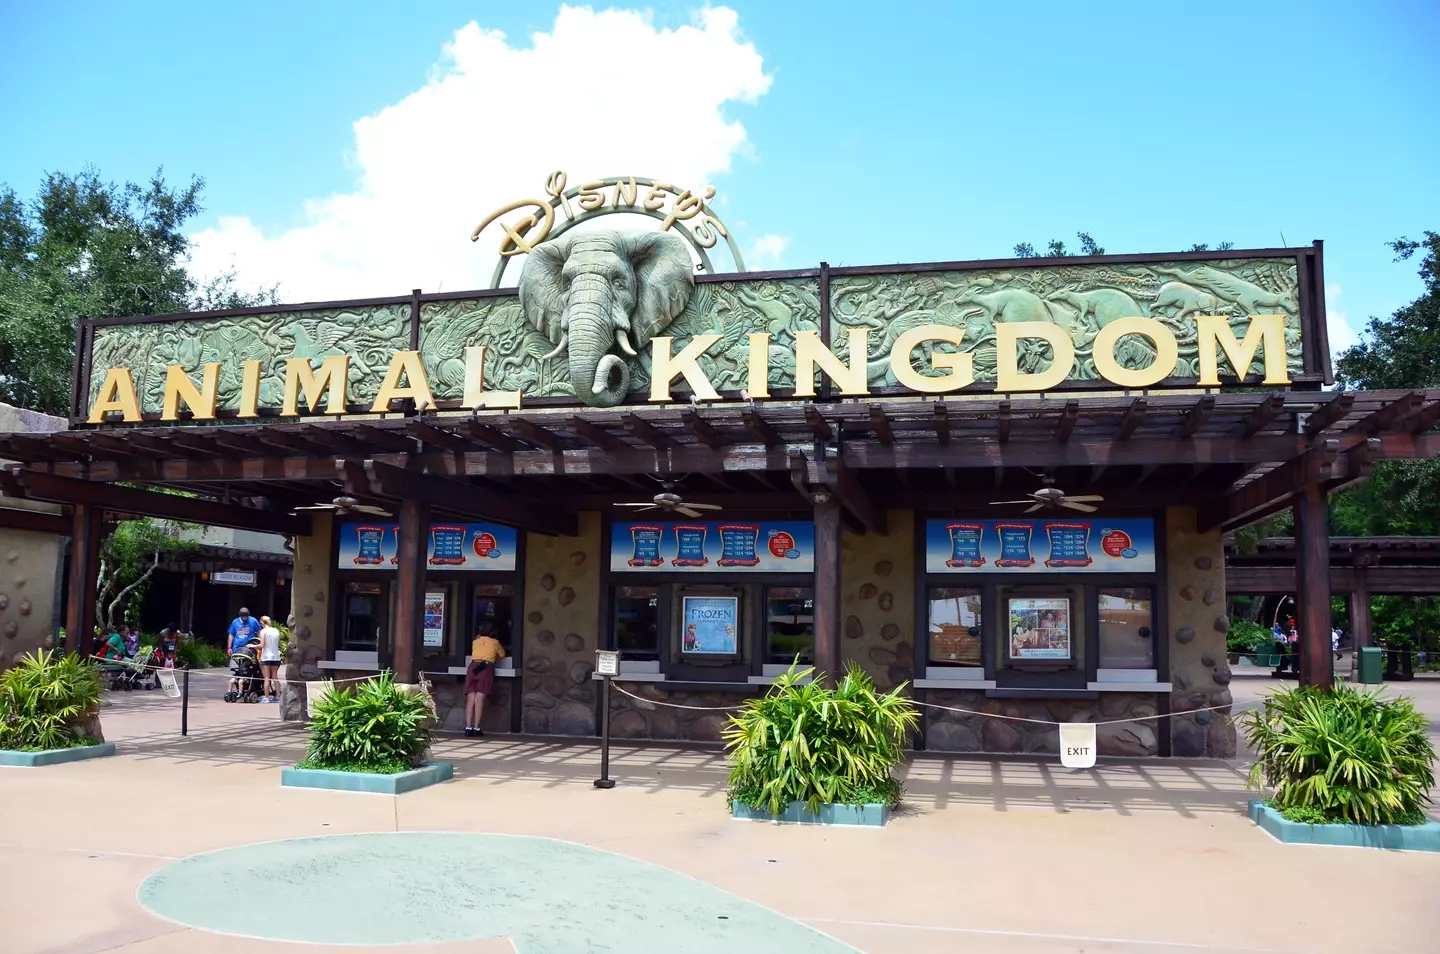 The fugitive was spotted at Disney's Animal Kingdom in Florida by an off-duty police officer.